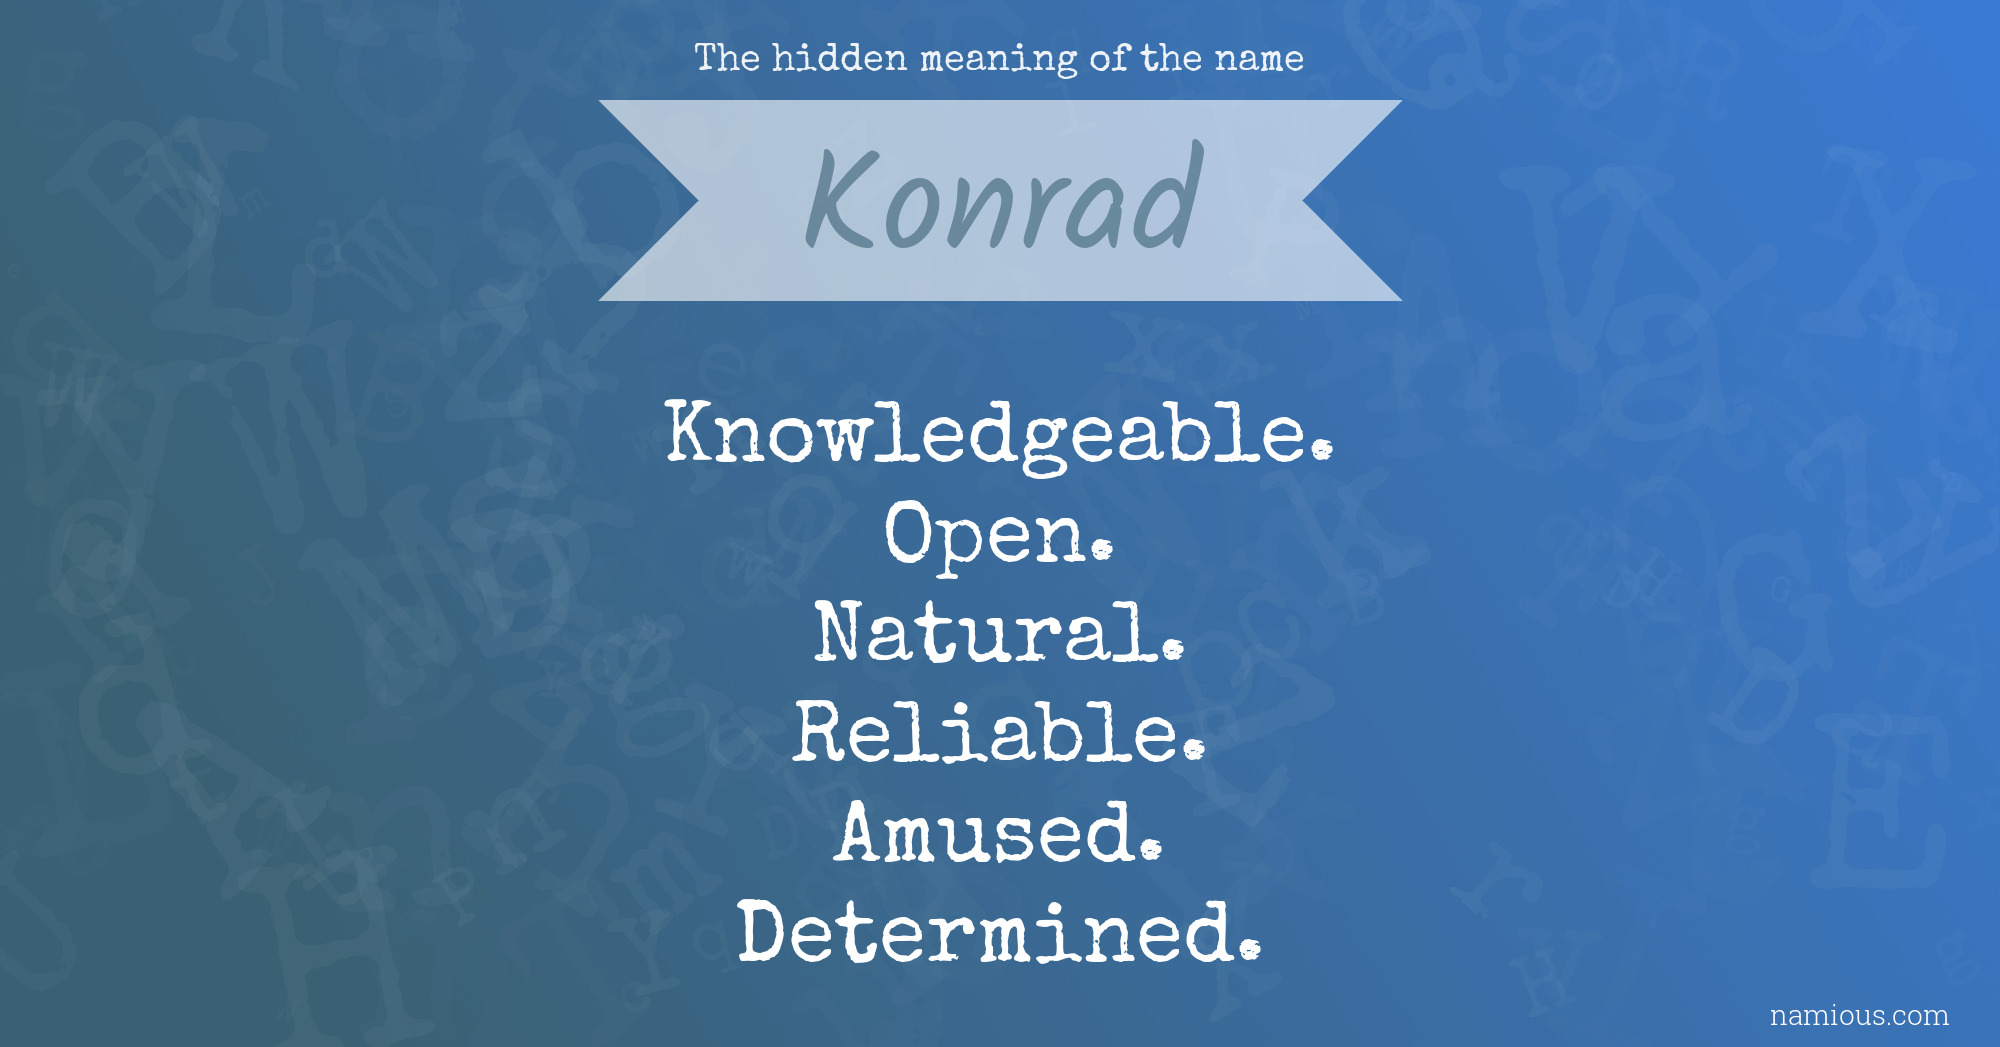 The hidden meaning of the name Konrad